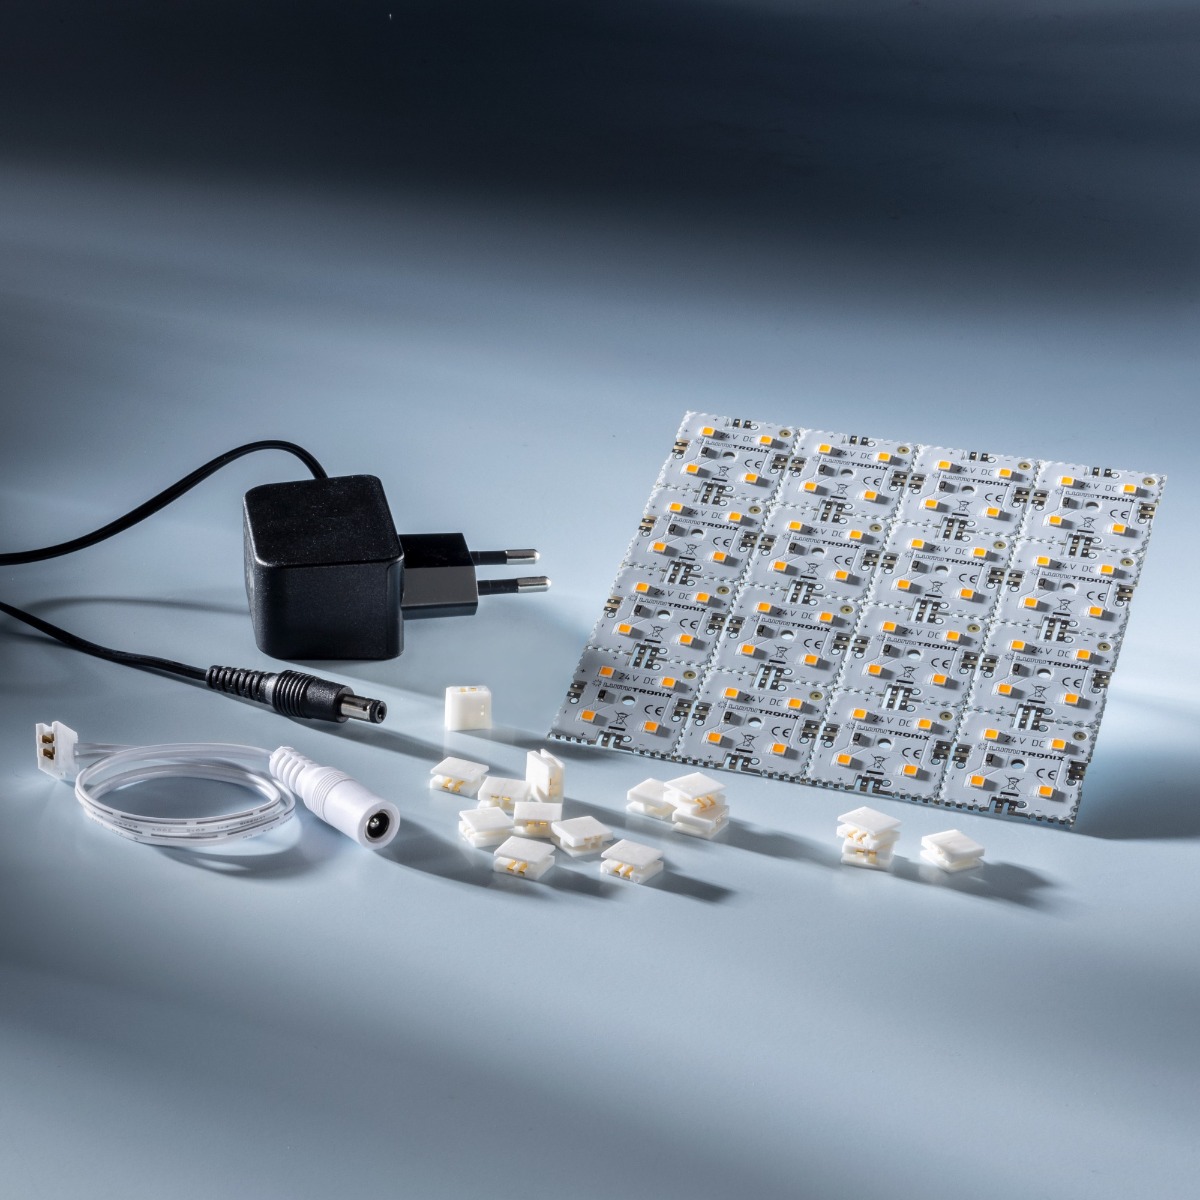 Plug&Play Starter-Set 16x Nichia LED Backlight Module MatrixMini 4 LEDs 24V White 2700K 1088lm and 7.6W 4.72"x4.72" total with driver and cables